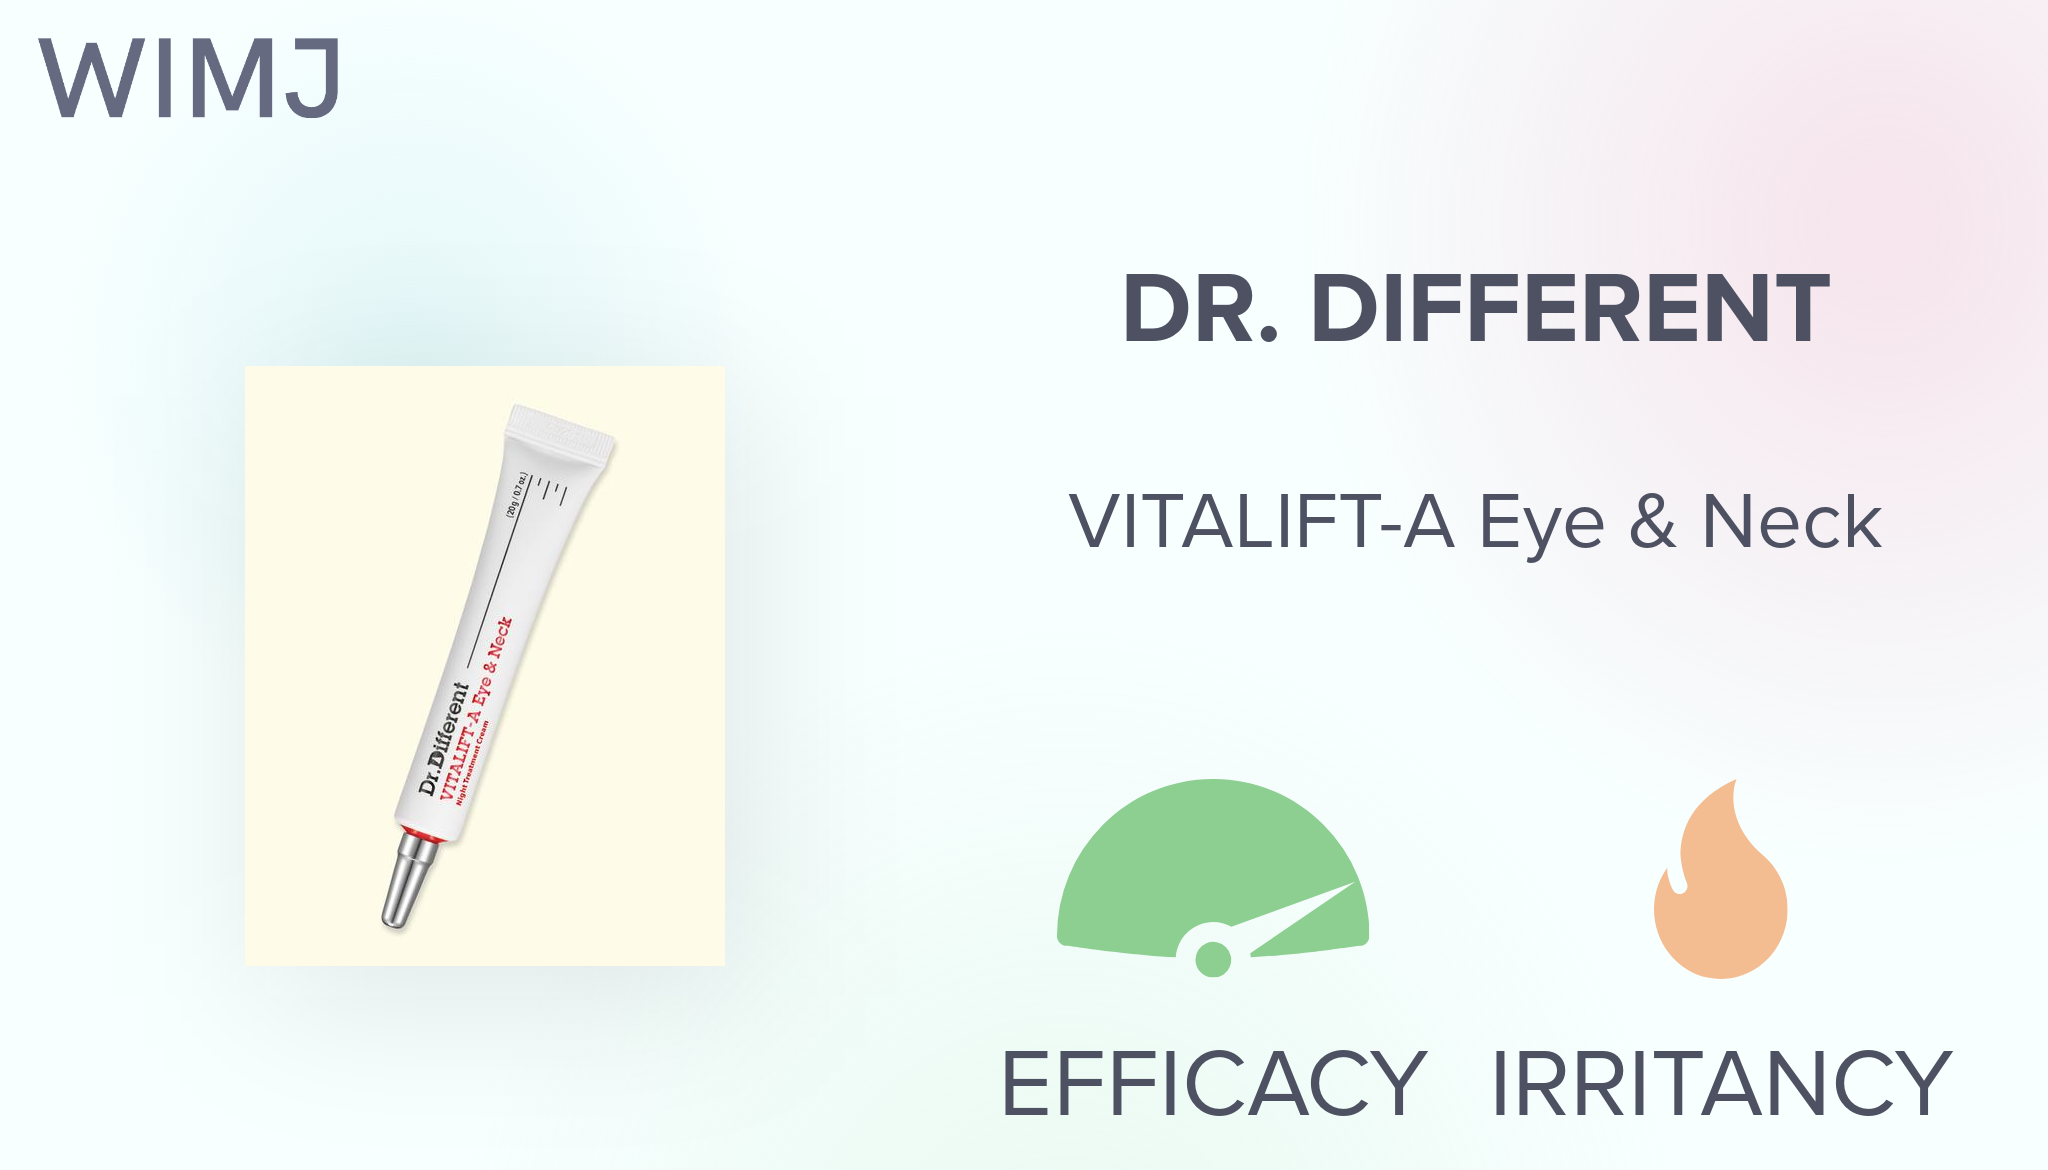 Review: Dr. Different - VITALIFT-A Eye & Neck